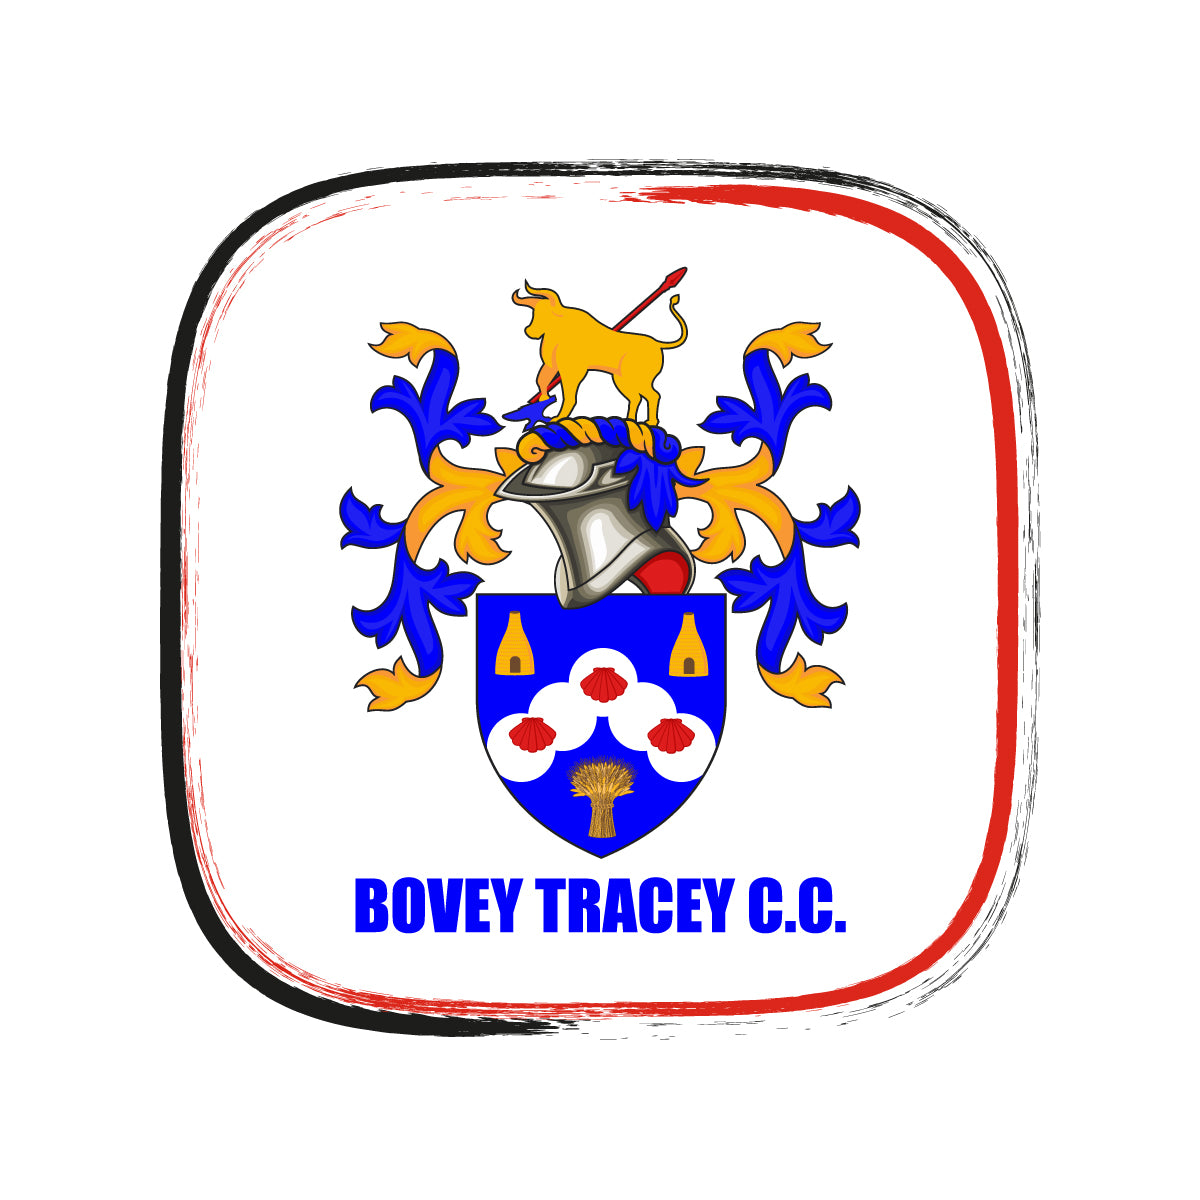 Bovey Tracey CC